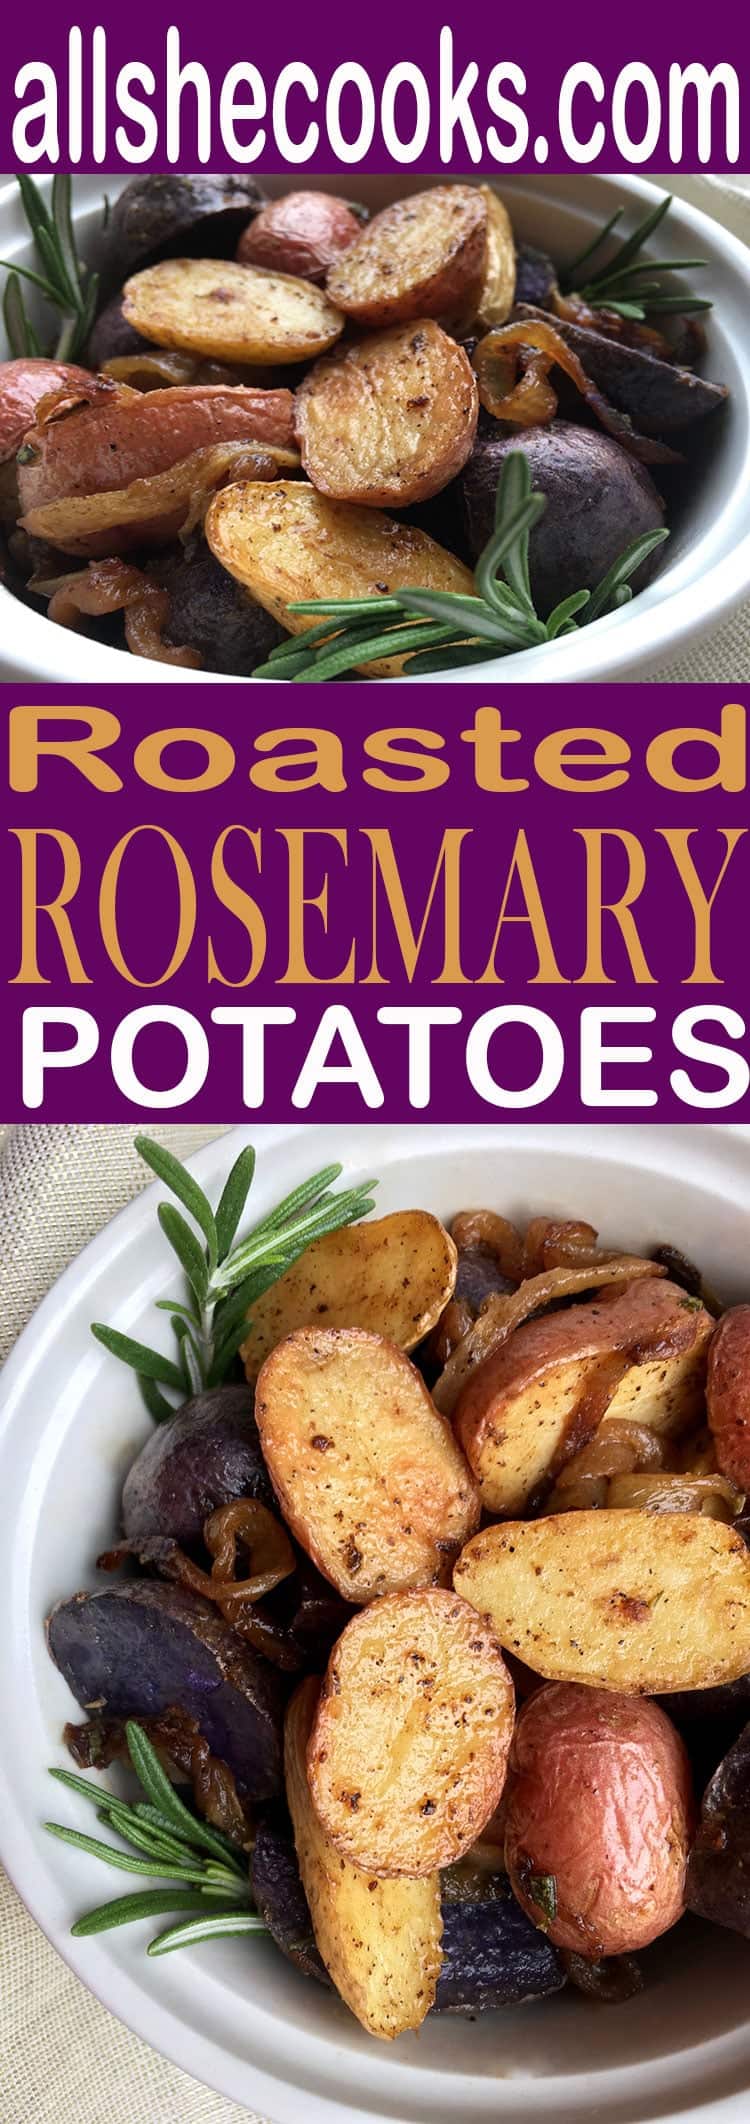 Easy Rosemary Roasted Potatoes are colorful and make a healthier for you side dish for dinner. Learn how to make this easy recipe.